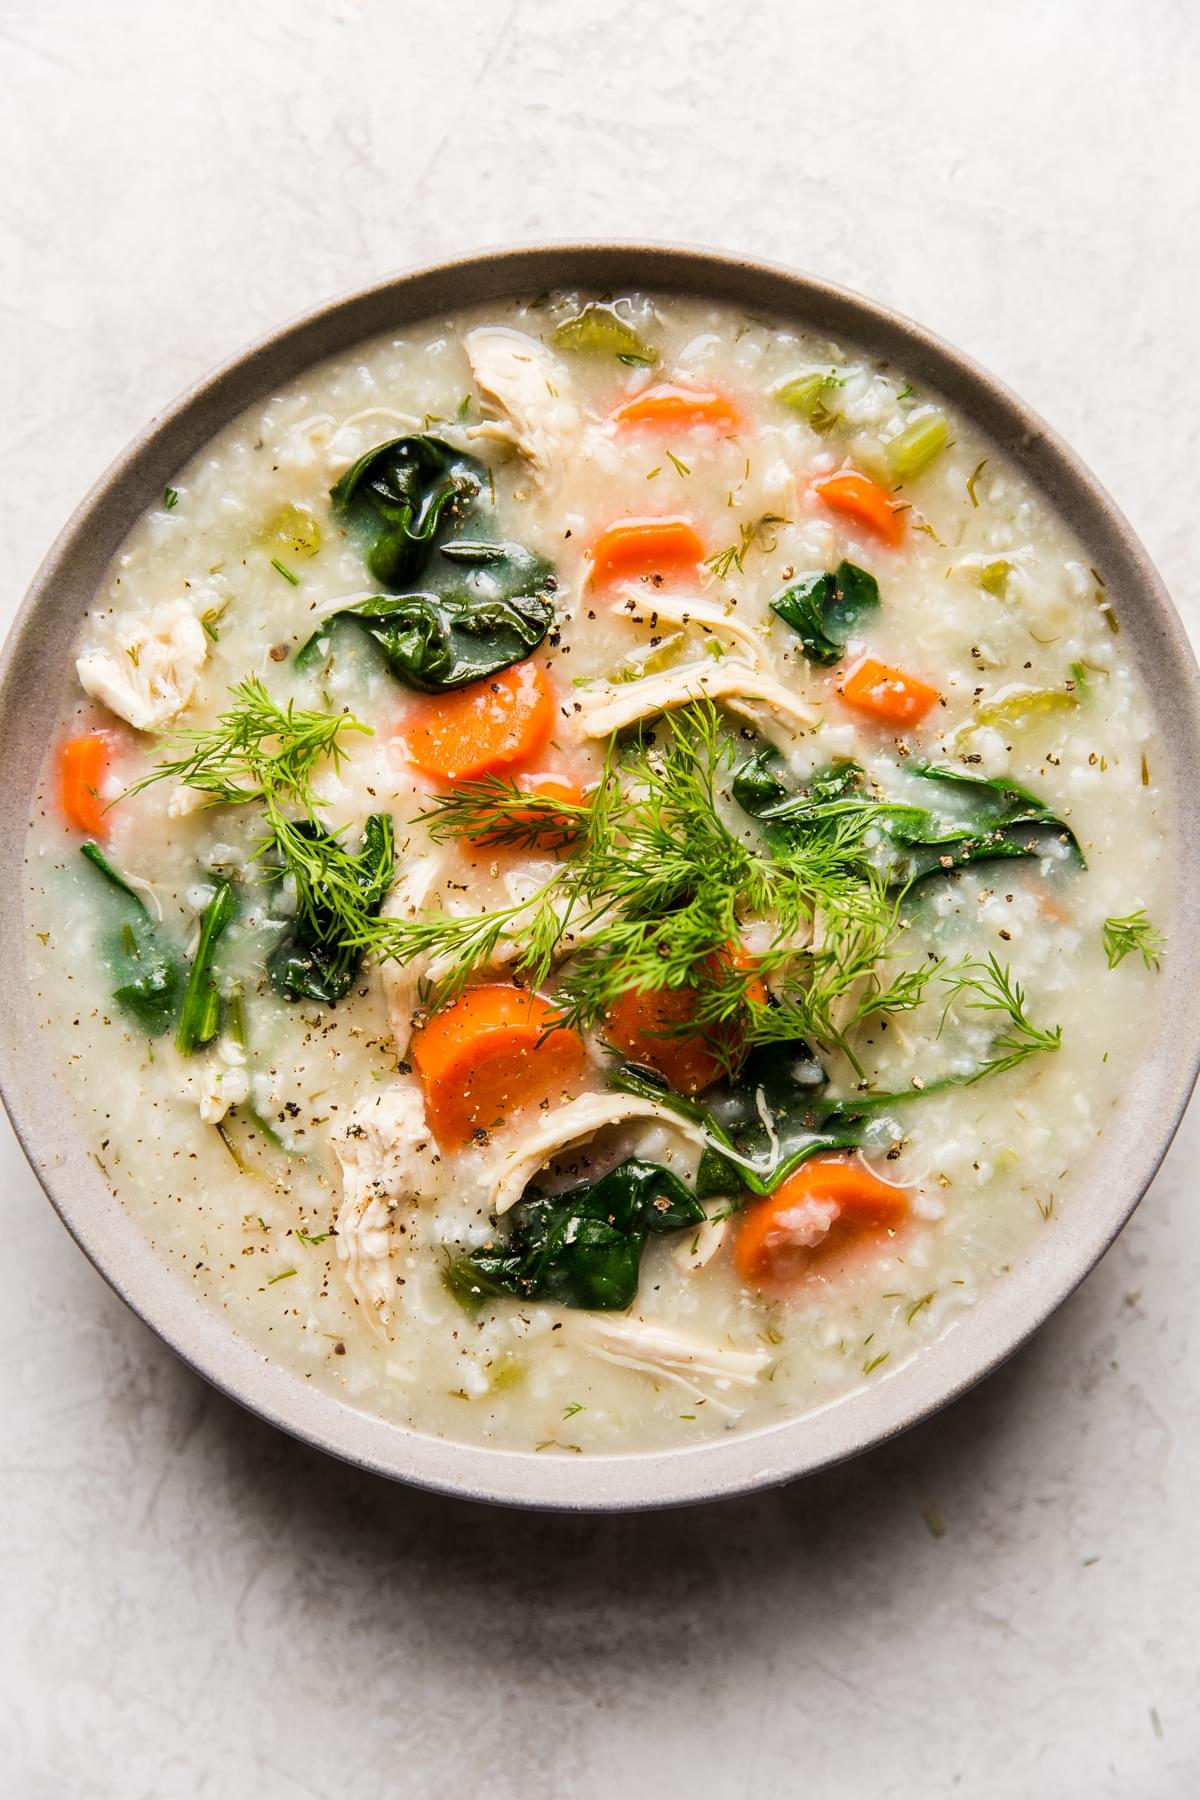 Chicken and rice soup with carrots, spinach, dill and lemon in a bowl